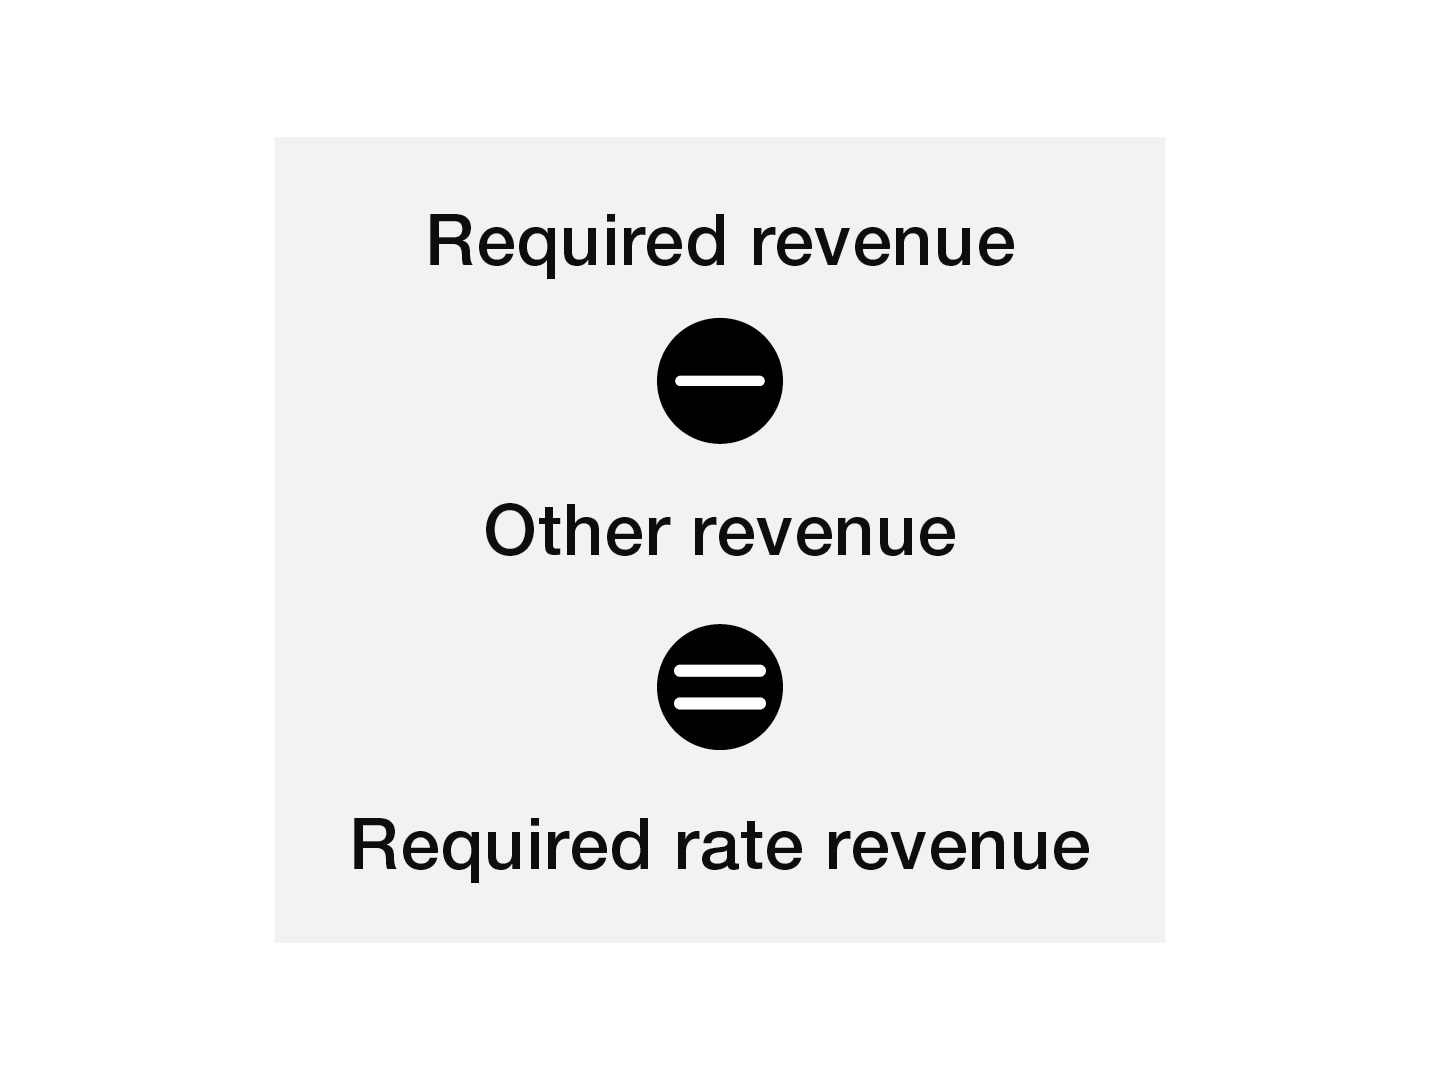 Required revenue minus other revenue equals the required rate revenue